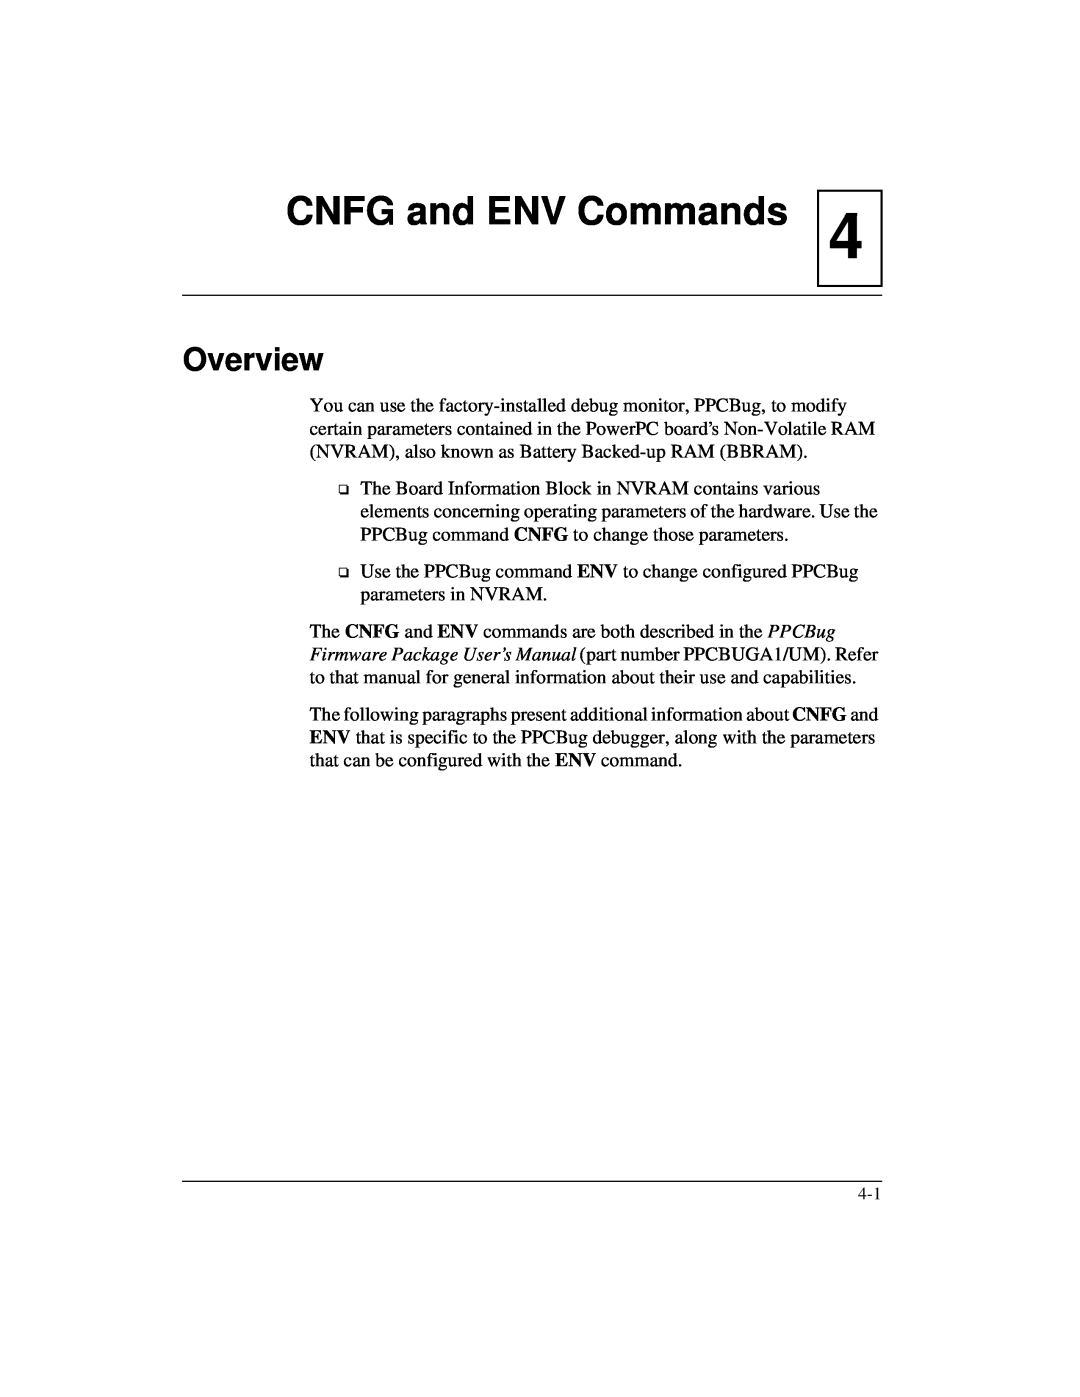 Motorola IH5, MCPN750A manual CNFG and ENV Commands, Overview 